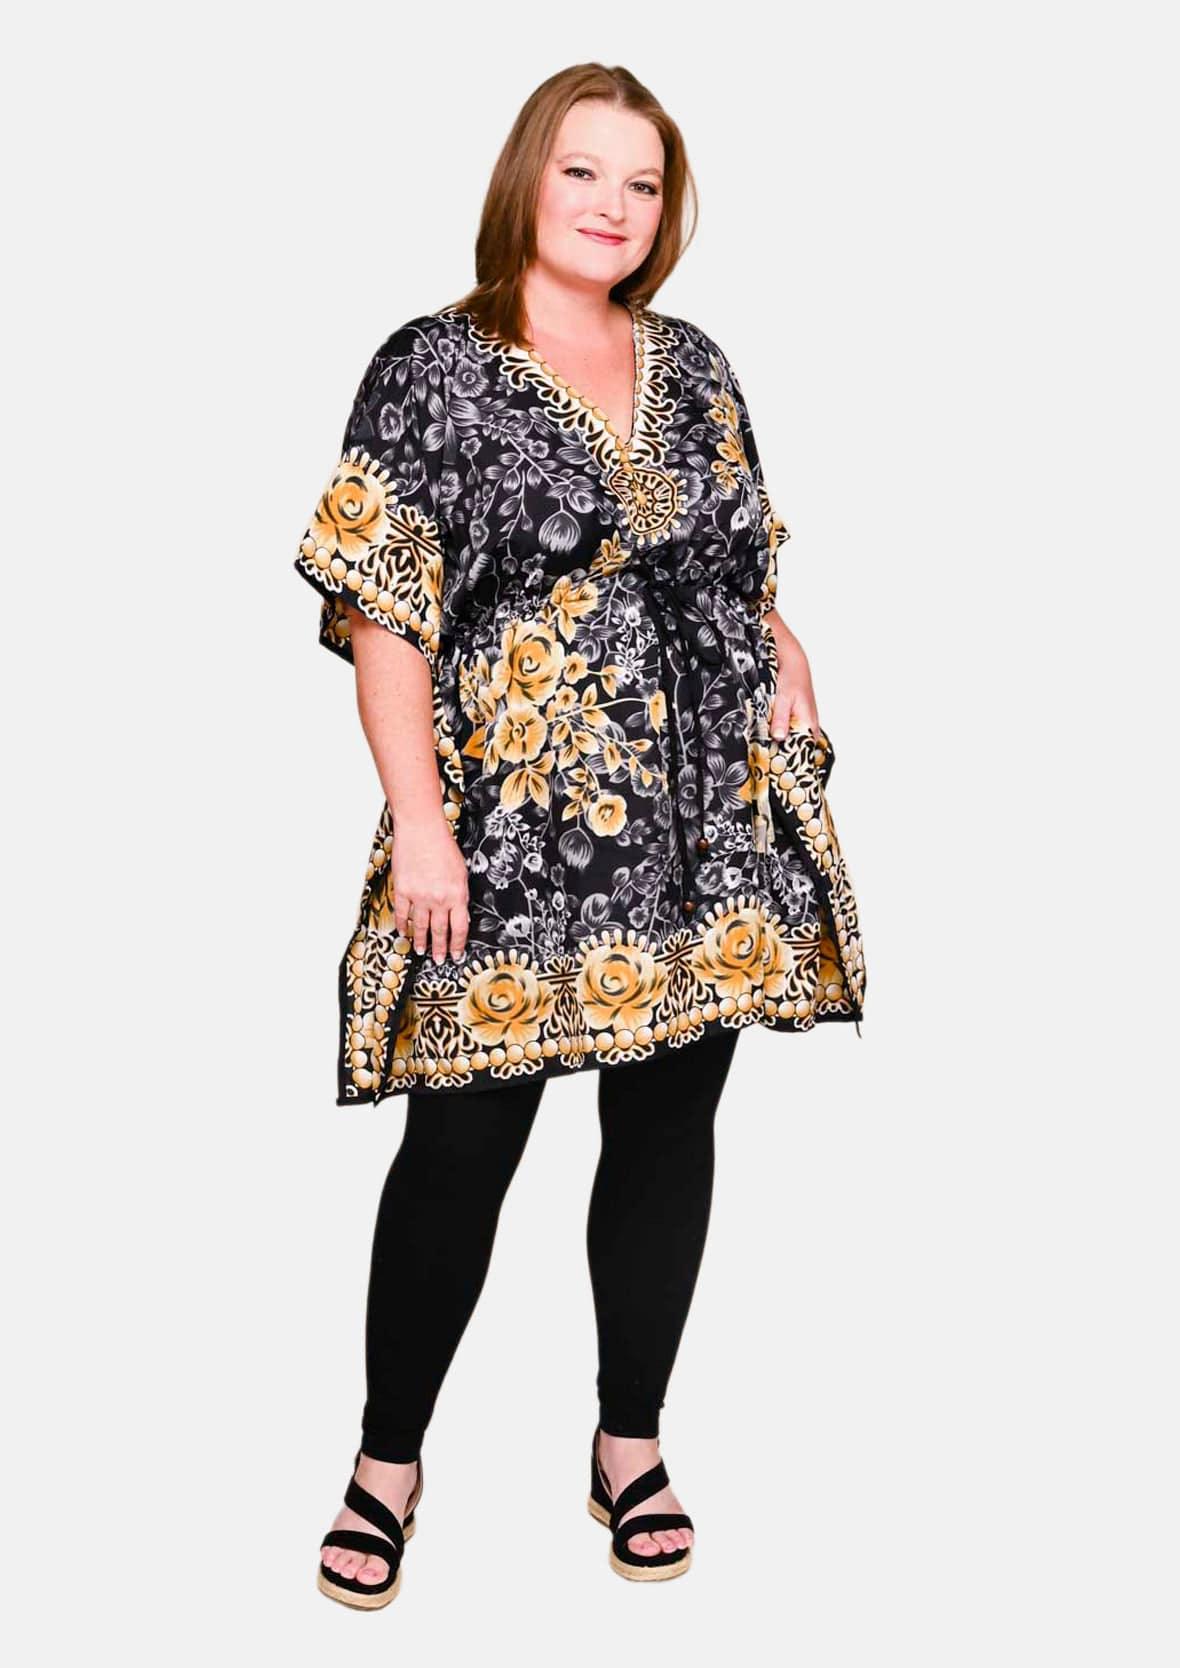 floral gray kaftan with side pockets #color_Gray Yellow Floral